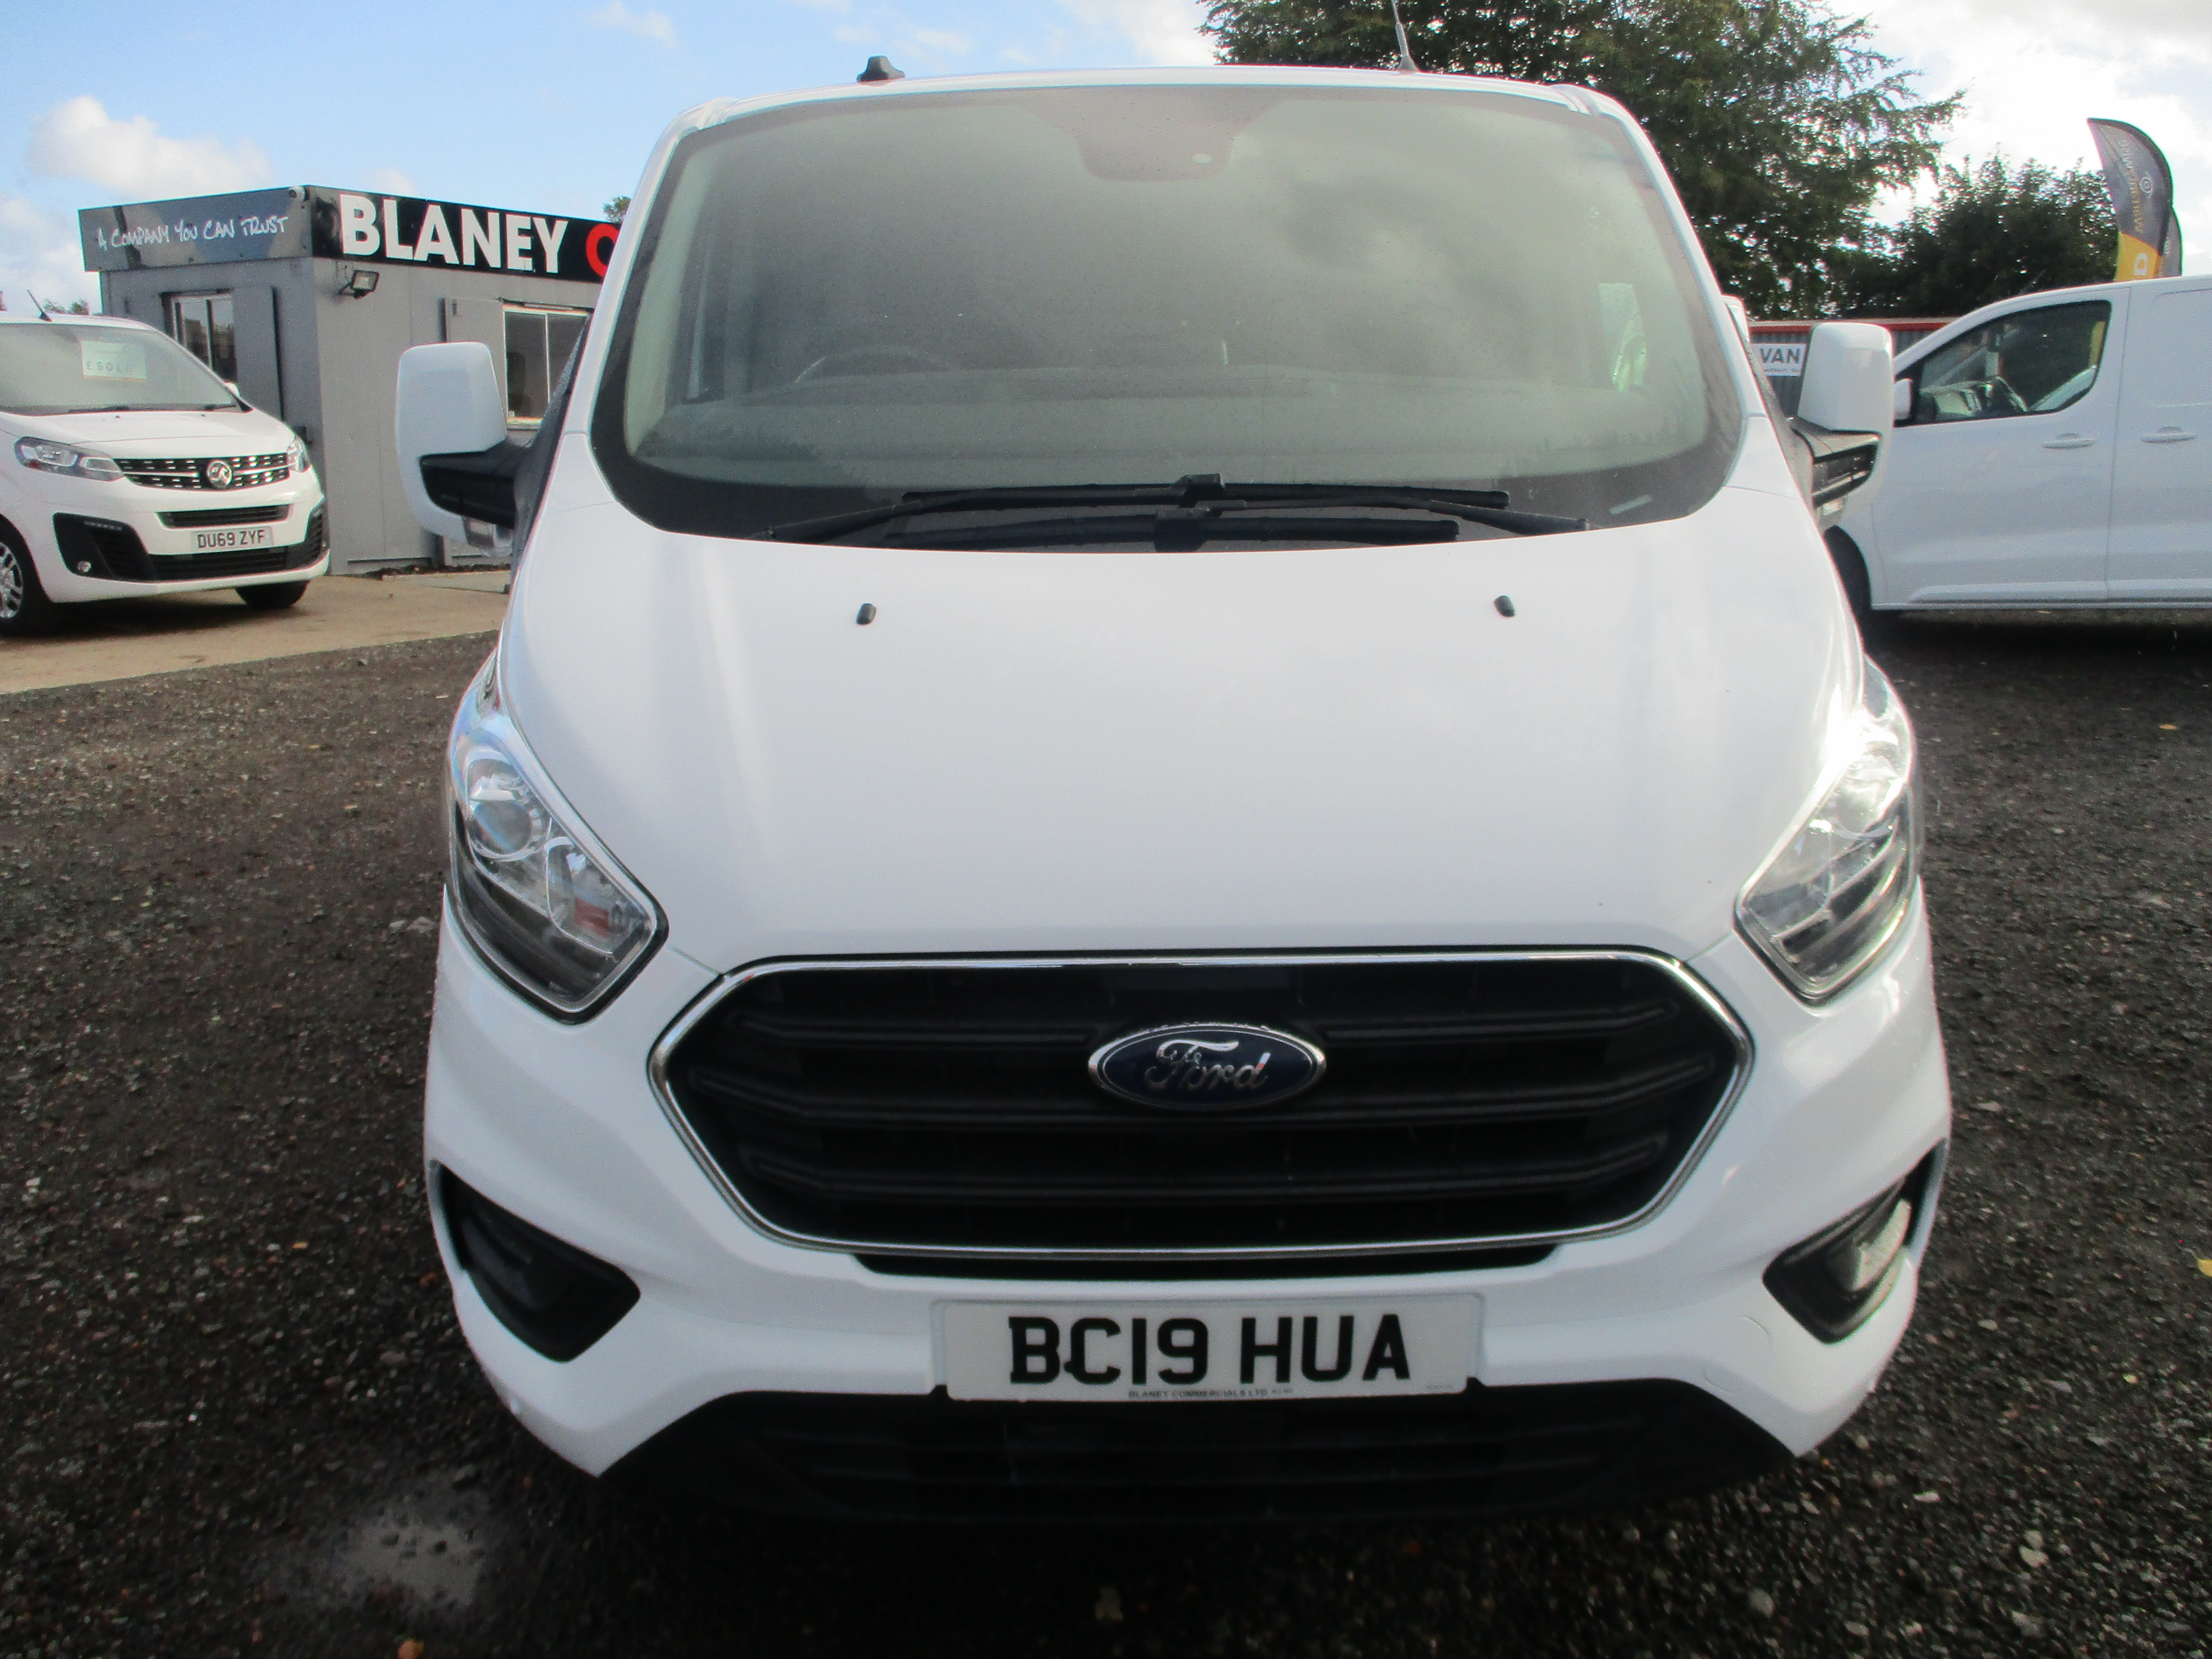 Ford Custom 300 L1H1 2.0 EcoBlue 130PS LIMITED Panel Van with AIR CON ( £600 OFF RRP )